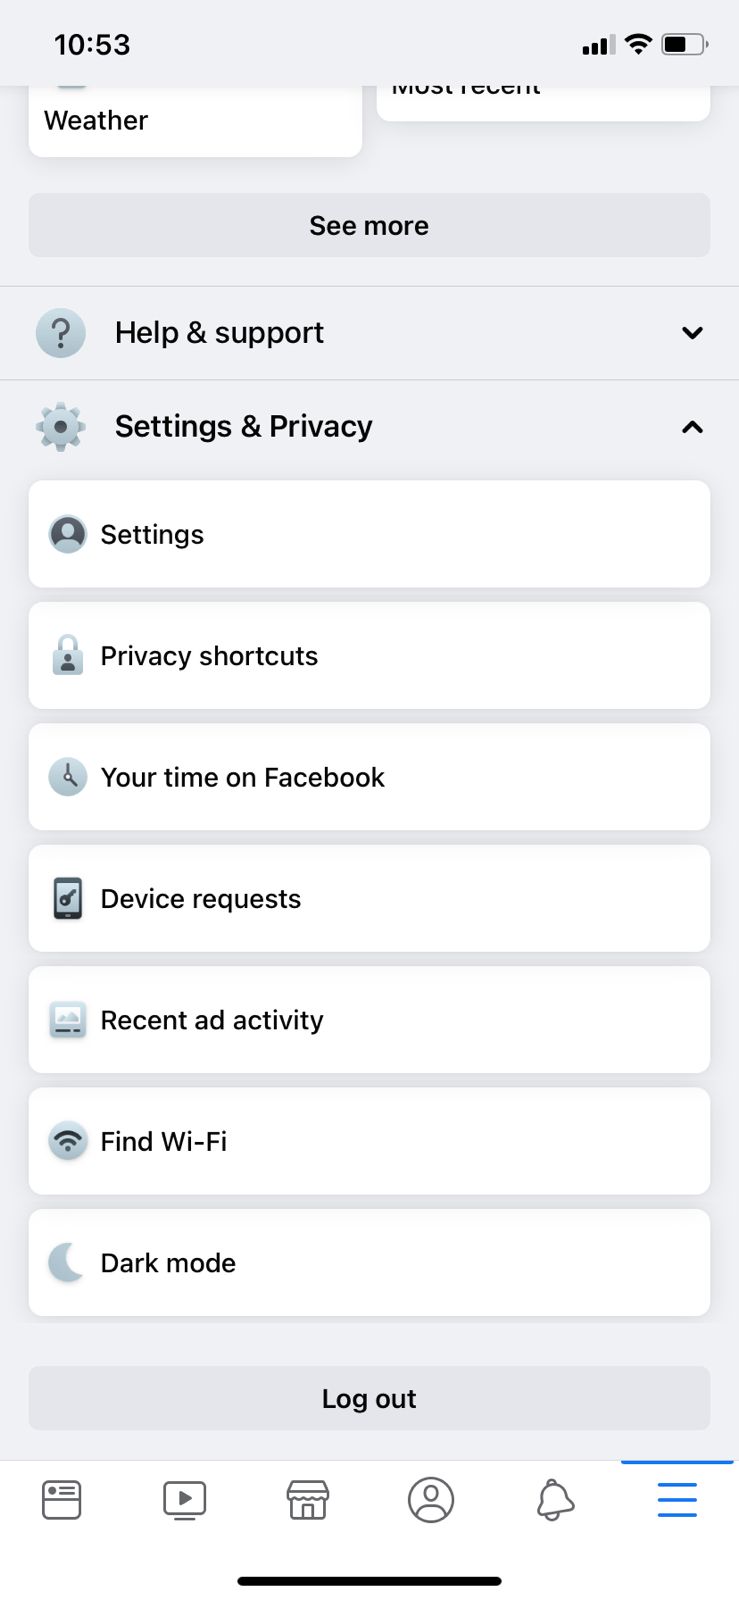 Settings & Privacy option